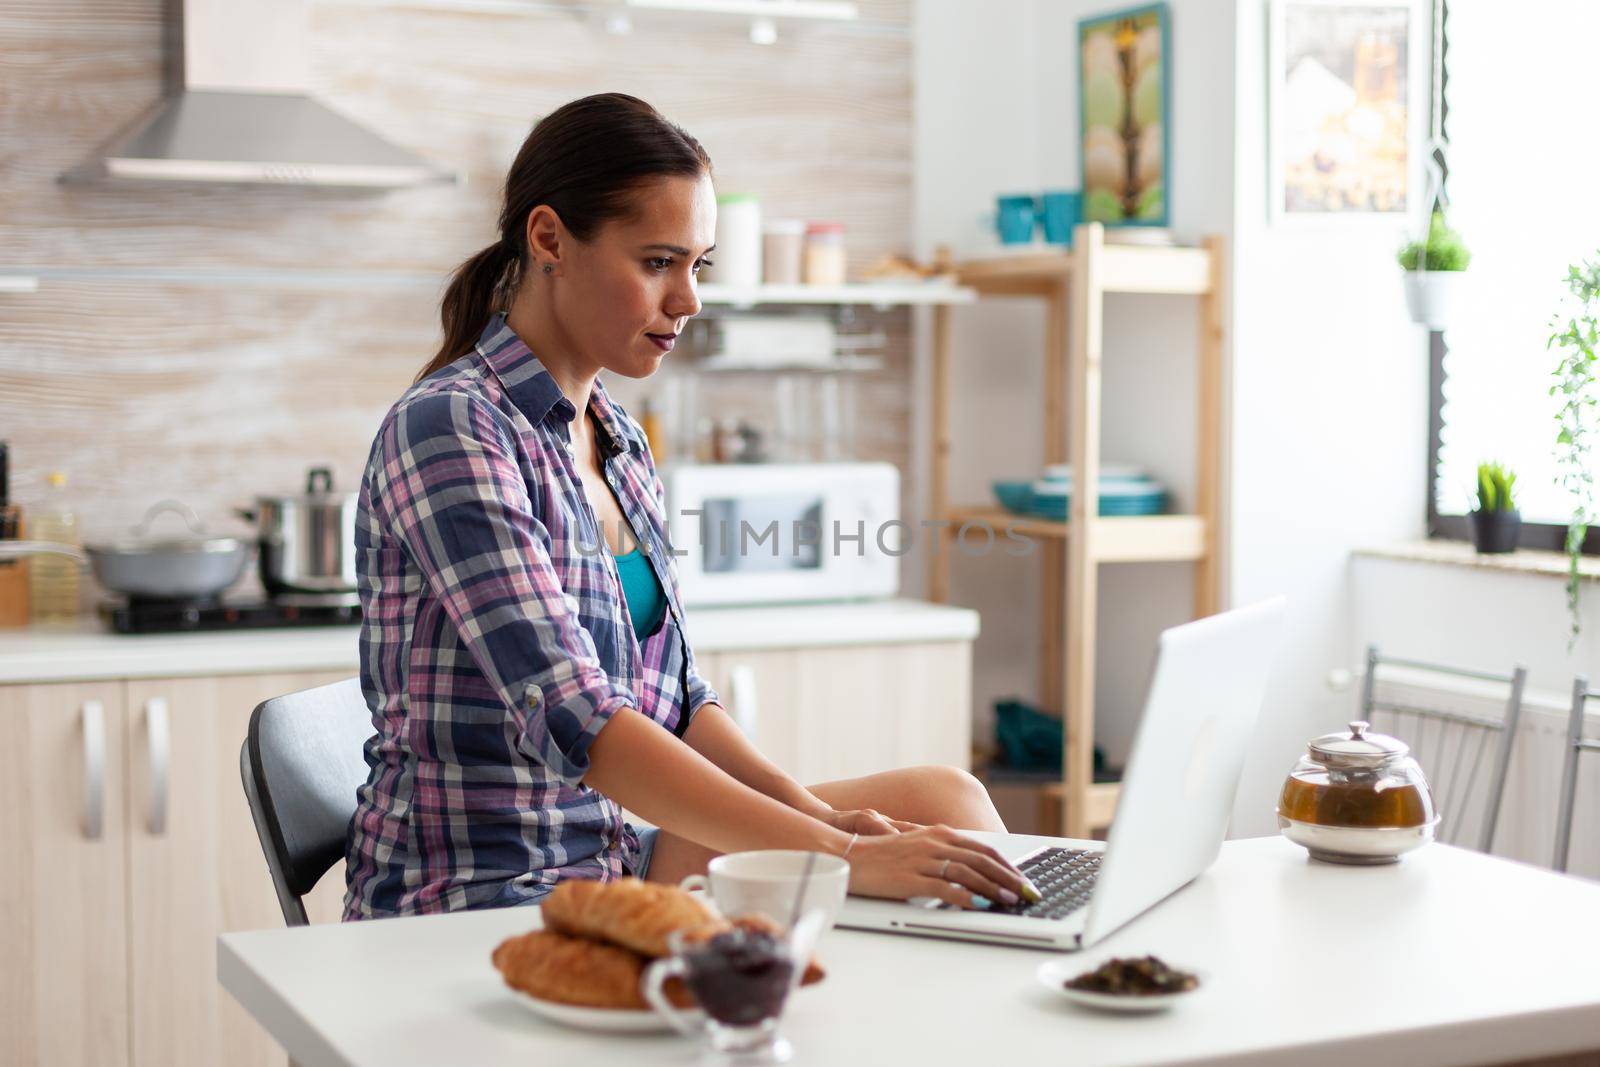 Woman working from home using laptop in kitchen during breakfast. Working from home using device with internet technology, browsing, searching on gadget in the morning.